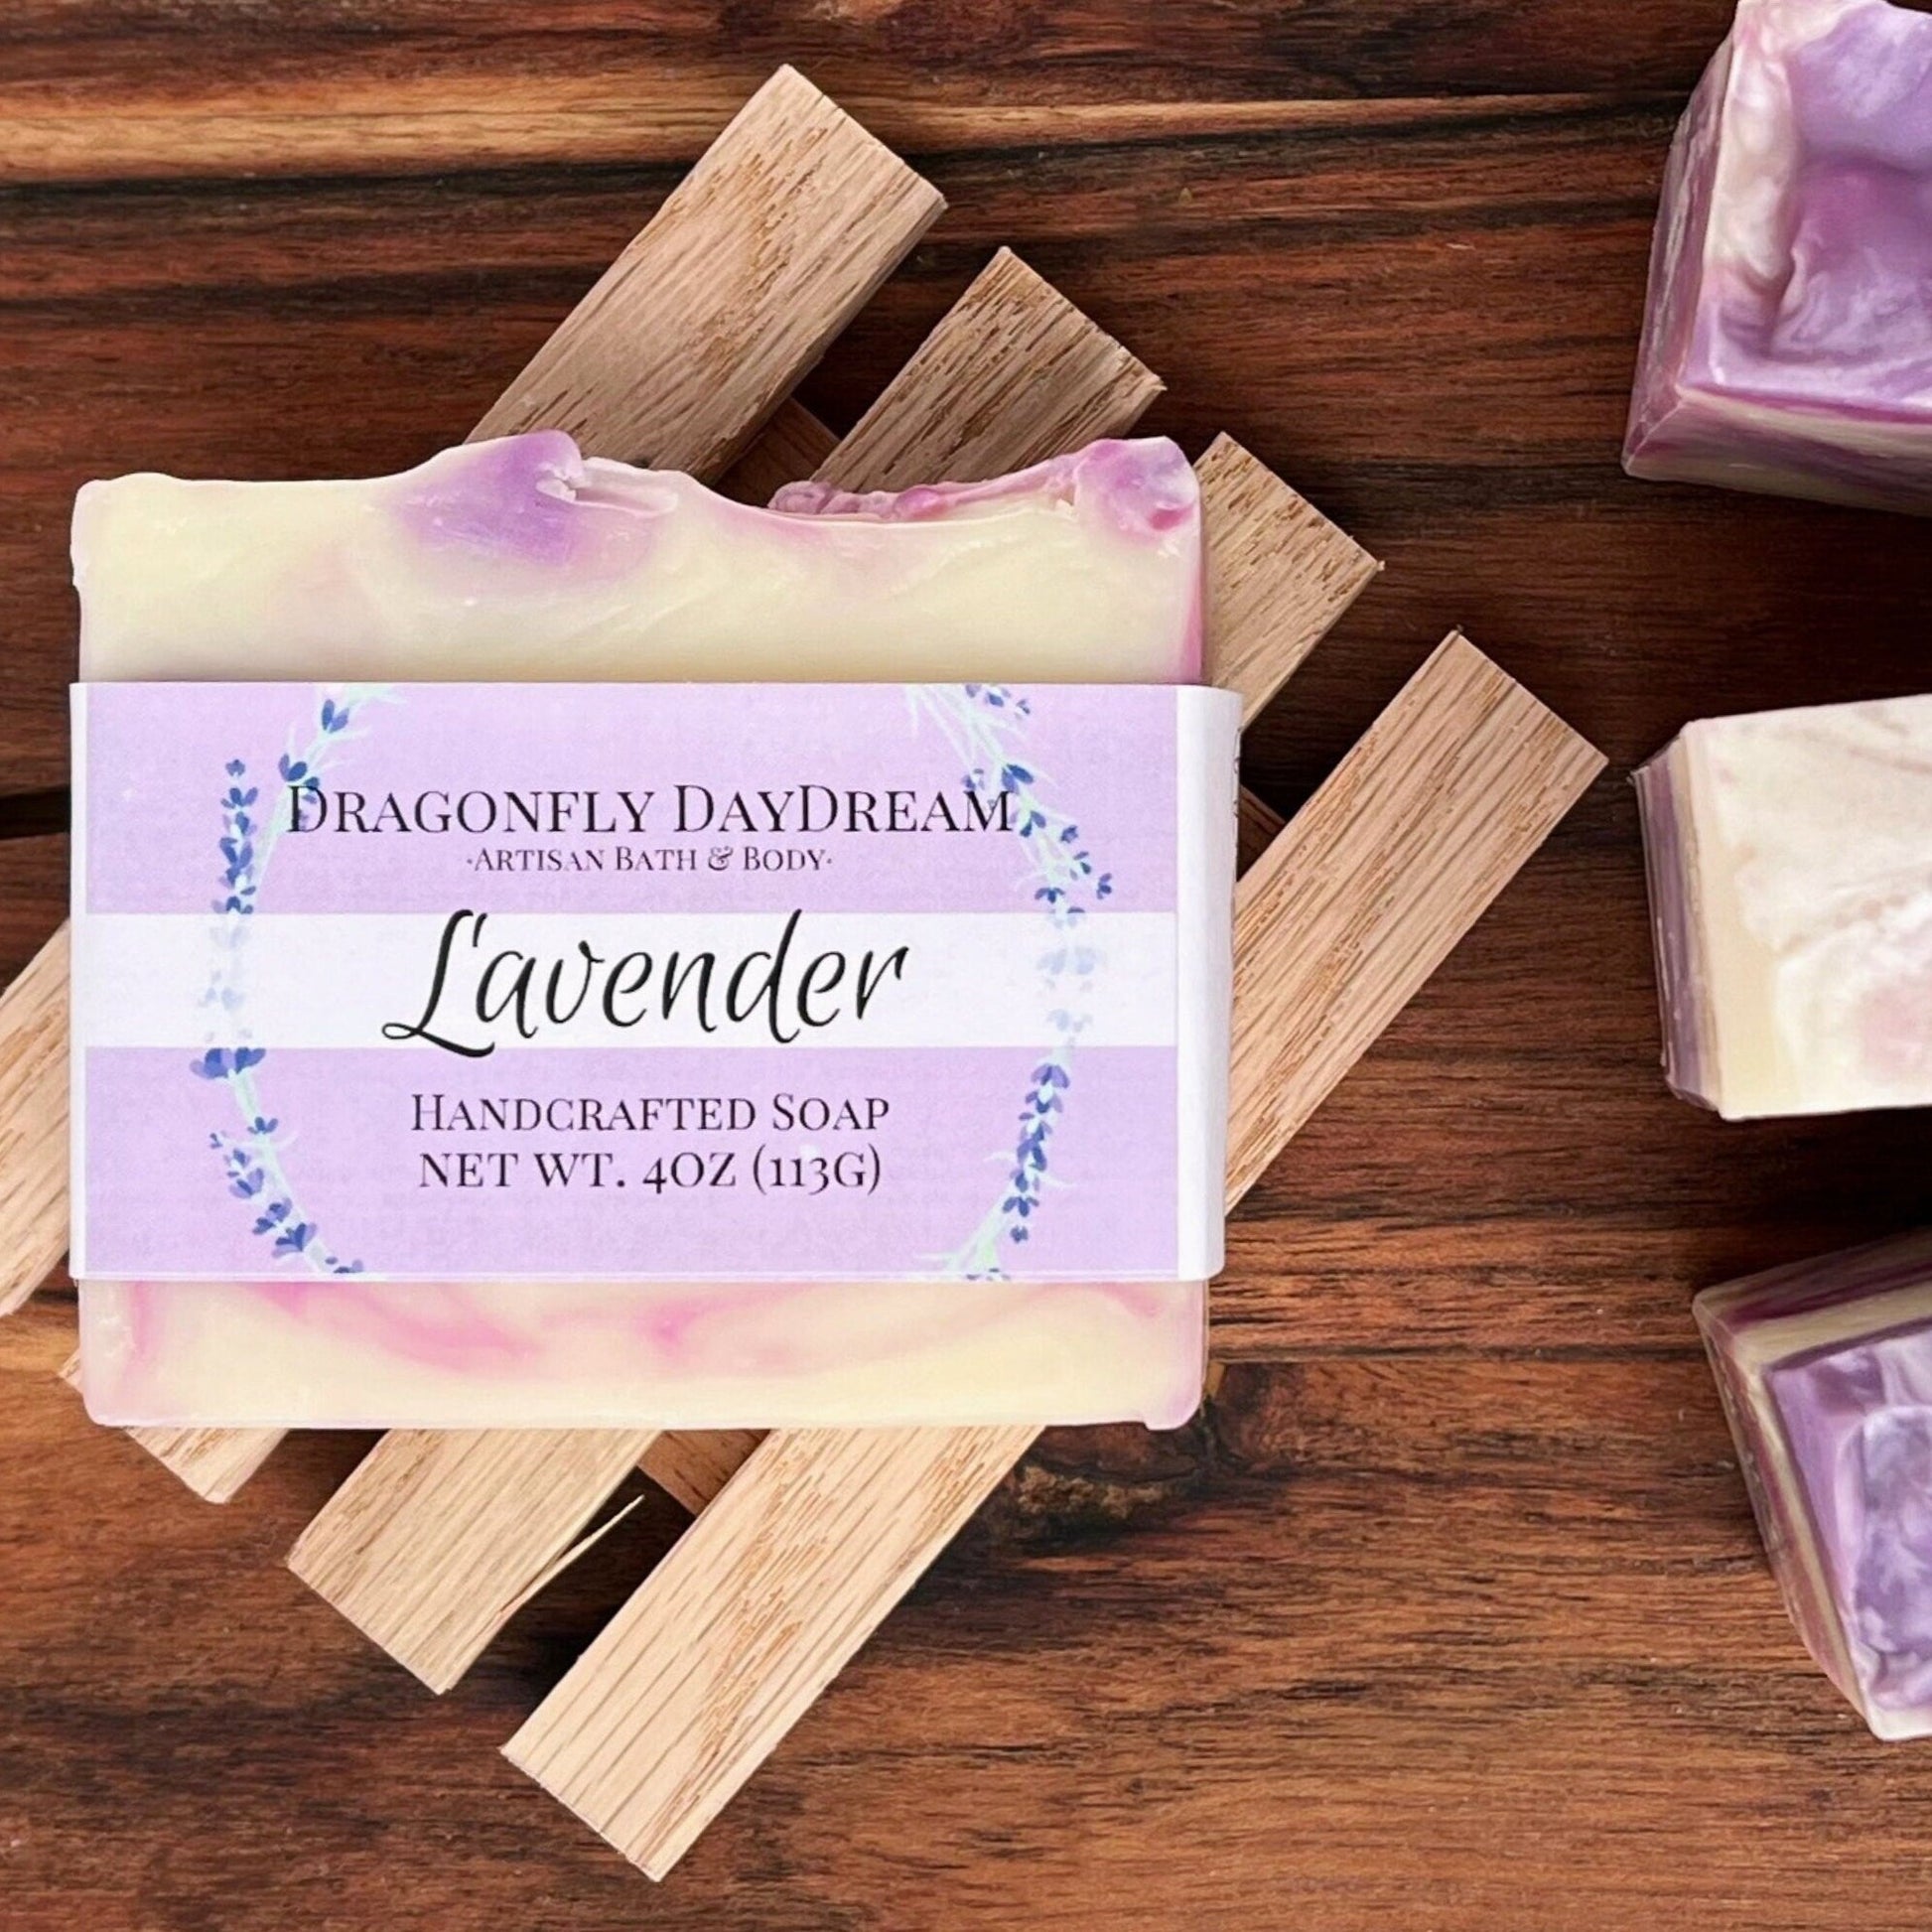 Lavender Handcrafted Soap, Dragonfly DayDream, Artisan Bath & BOdy, Net Wt. 4oz (113g).  Soap bar has lavender color swirls in a beige base. Soap bar sits atop a wooden slatted soap tray on a dark brown table top.  There are 3 Lavender soap bars off to the right